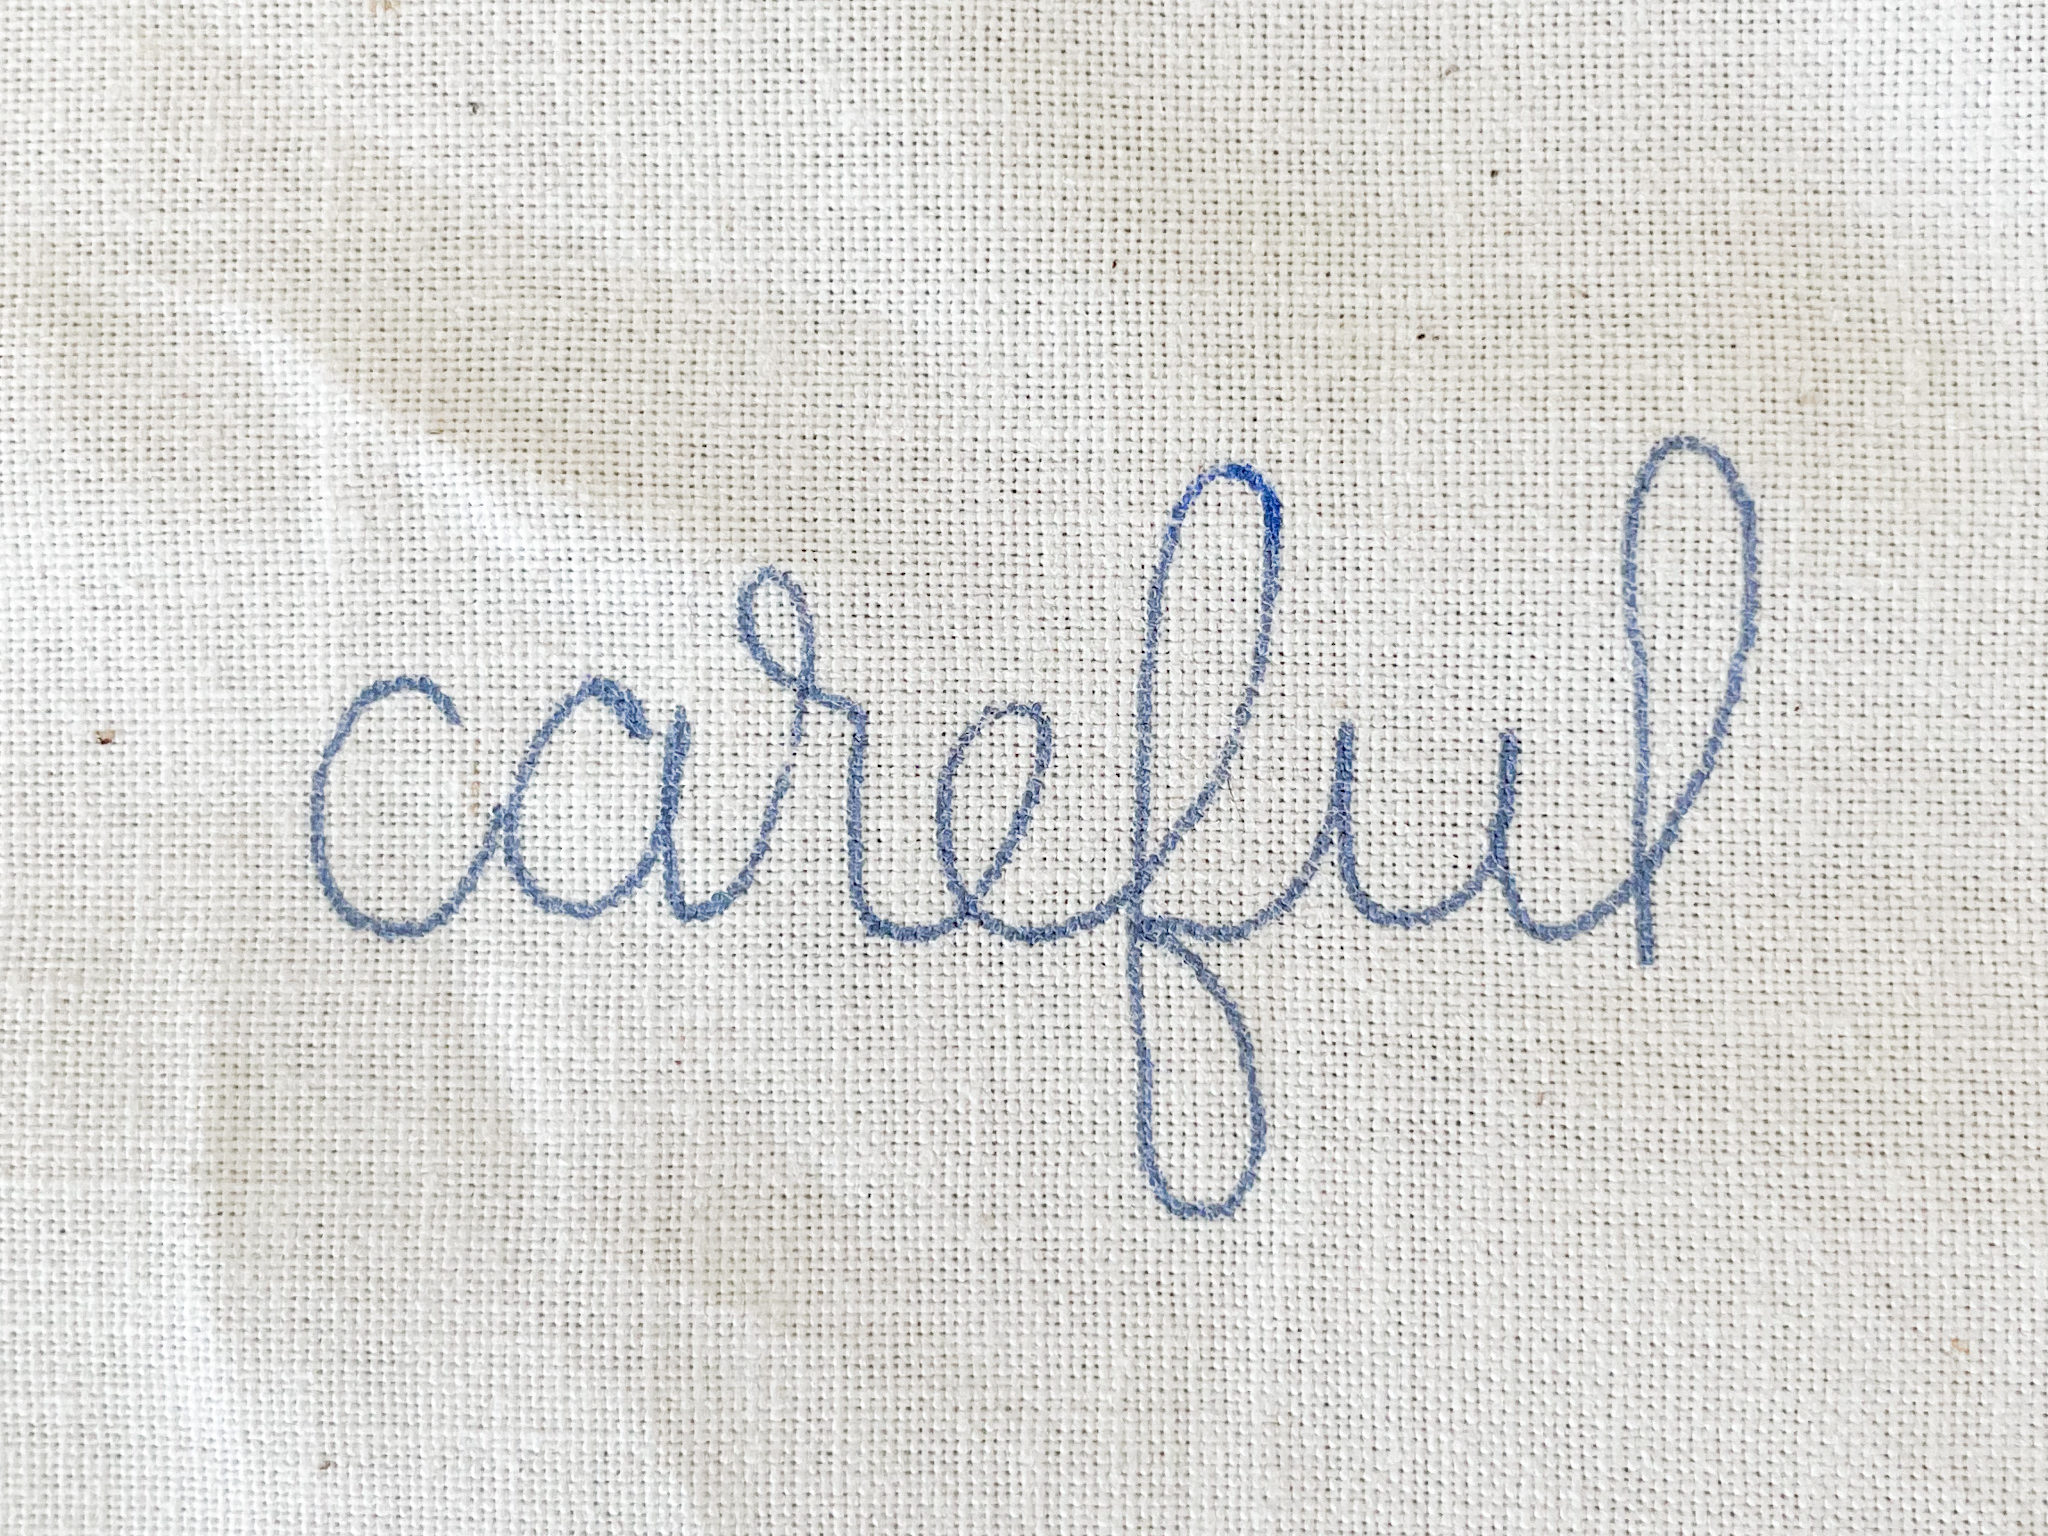 The word "careful" written on fabric. Showing what a good pattern transfer should look like. 